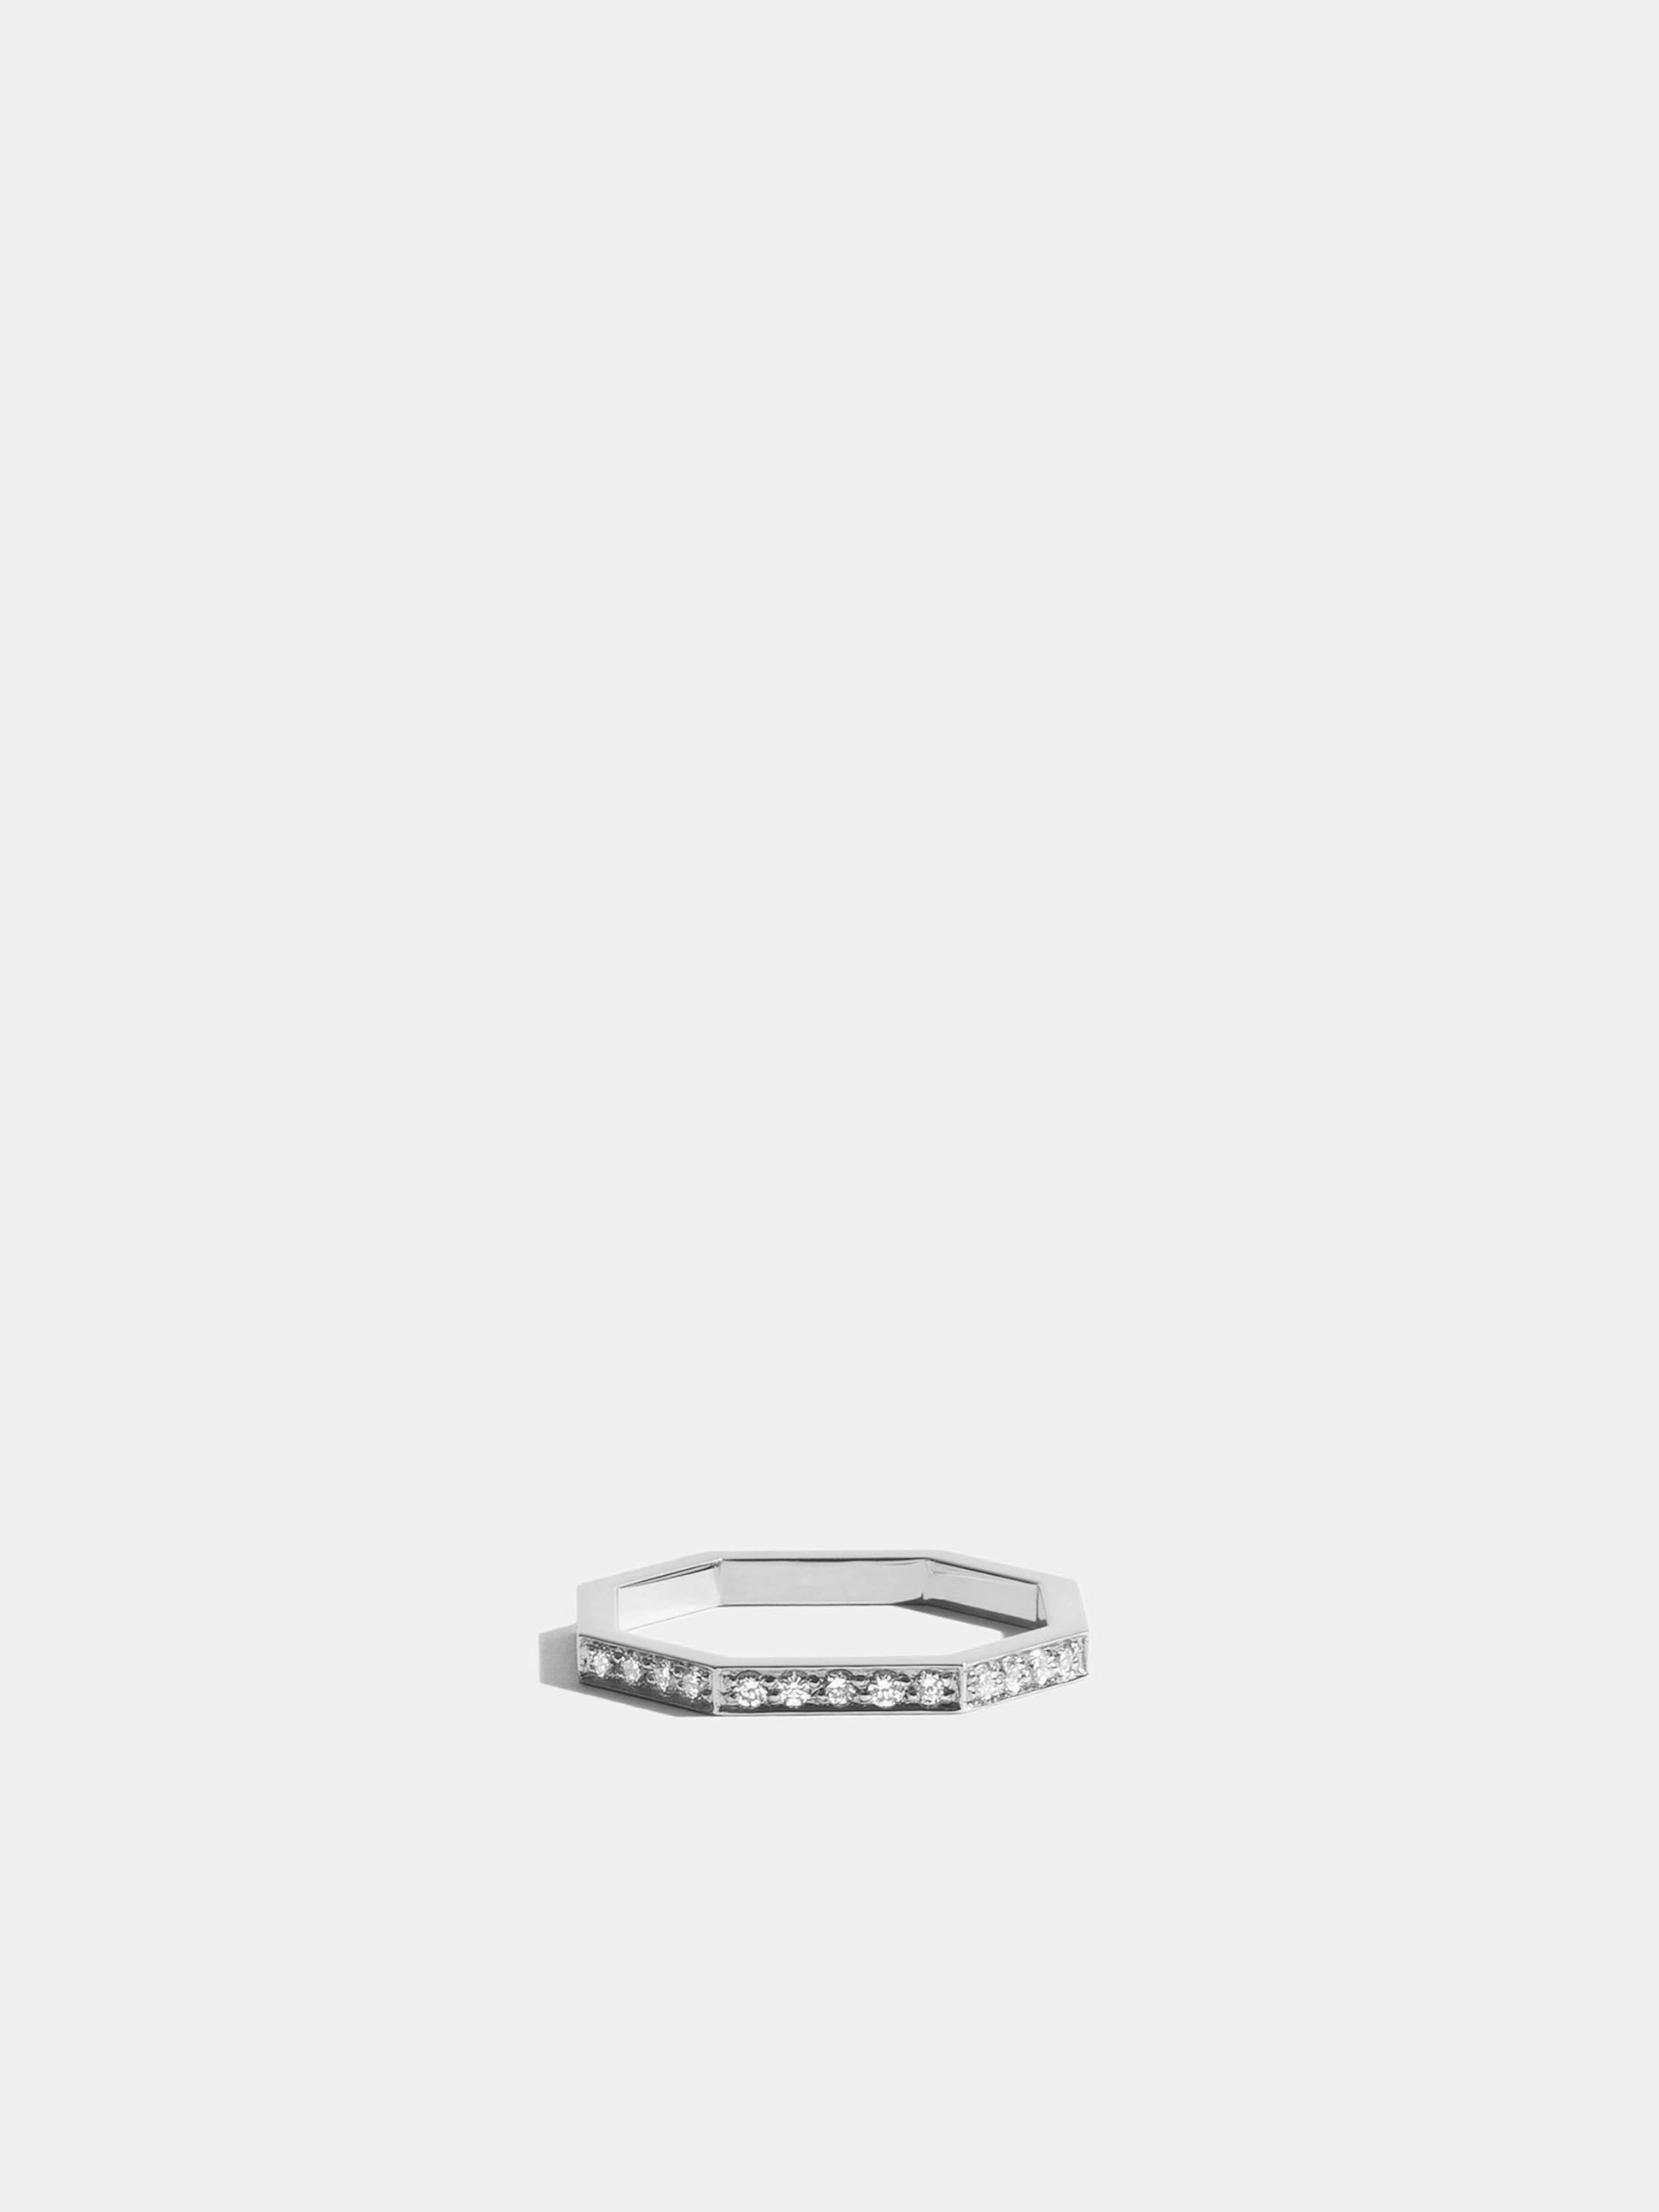 Octogone simple ring in 18k Fairmined ethical white gold and paved with lab-grown diamonds